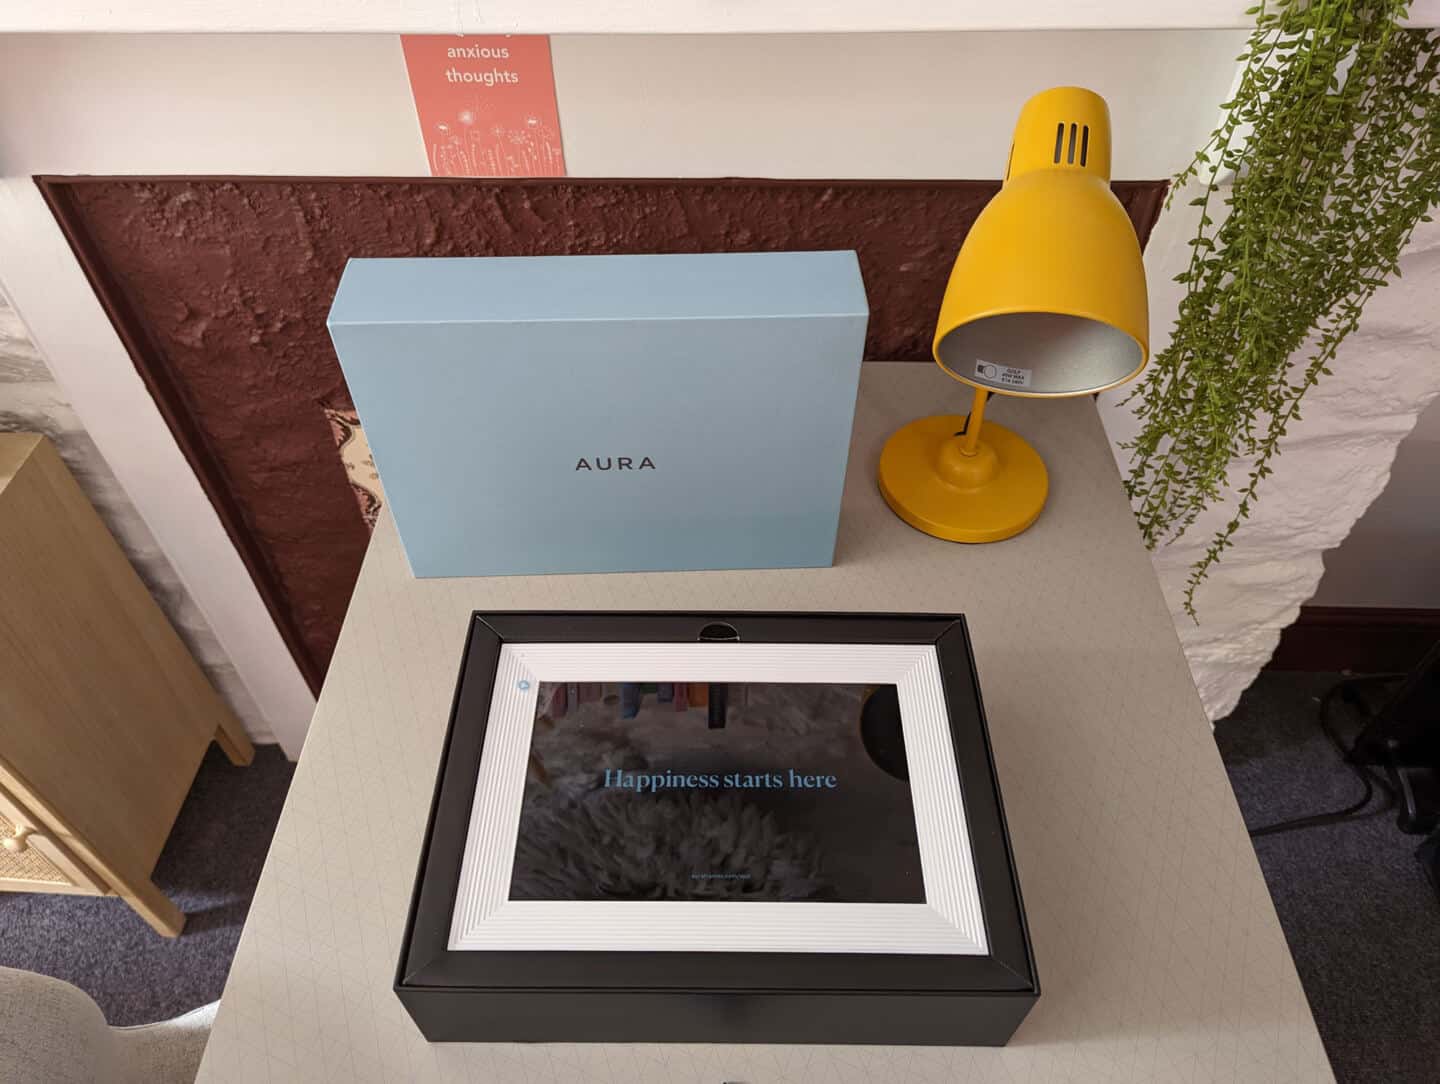 An open blue box on a desk next to a yellow lamp. The box contains a digital photo frame